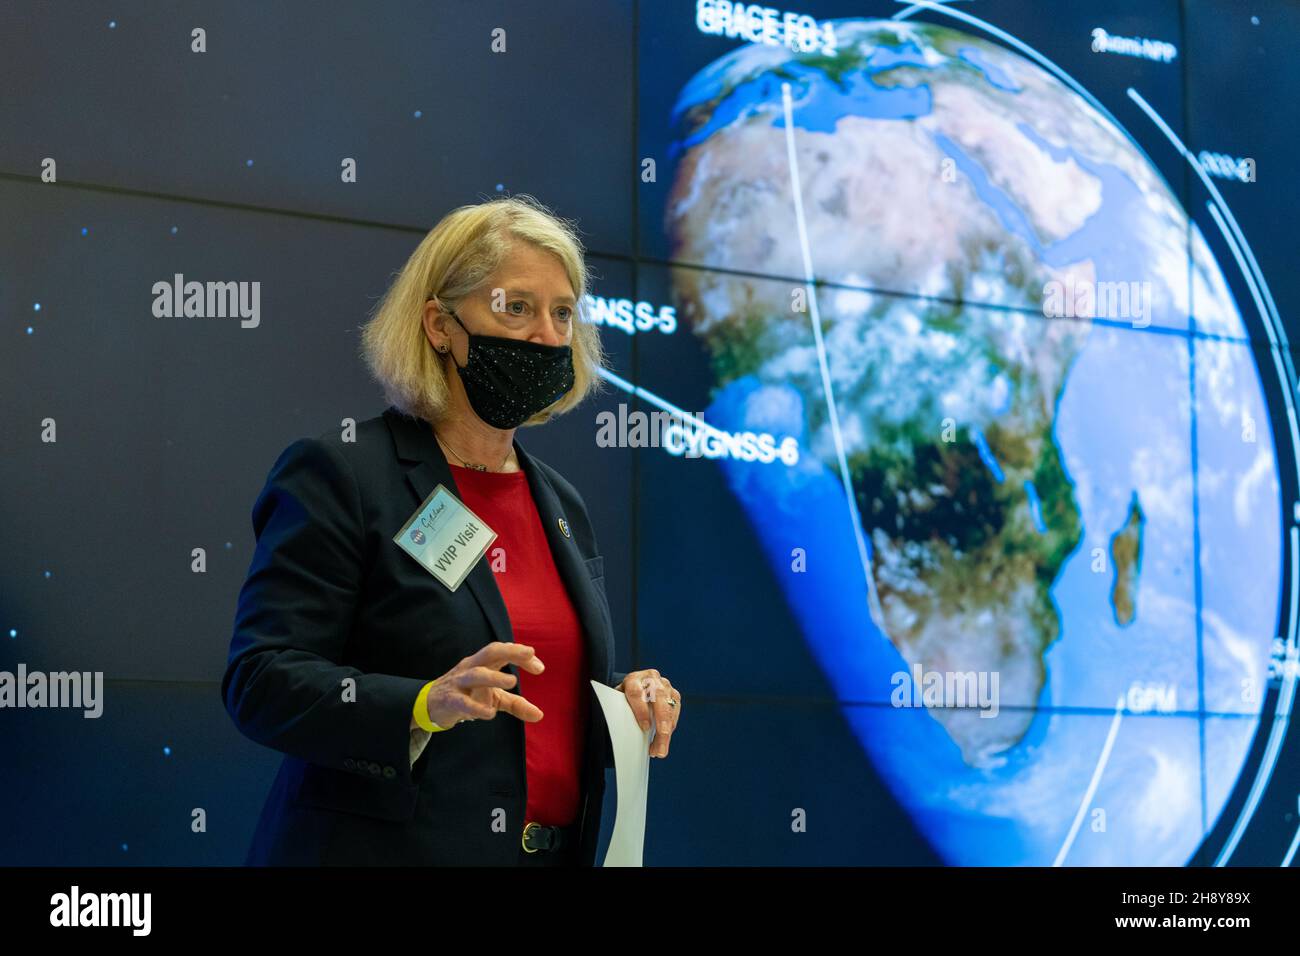 Greenbelt, United States of America. 05 November, 2021. NASA Goddard Deputy Administrator Pam Melroy present data visualizations and Earth Science implications of current satellite missions using the Hyperwall for Vice President Kamala Harris inside Goddard Space Flight Center, November 5, 2021 in Greenbelt, Maryland.  Credit: Taylor Mickal/NASA/Alamy Live News Stock Photo